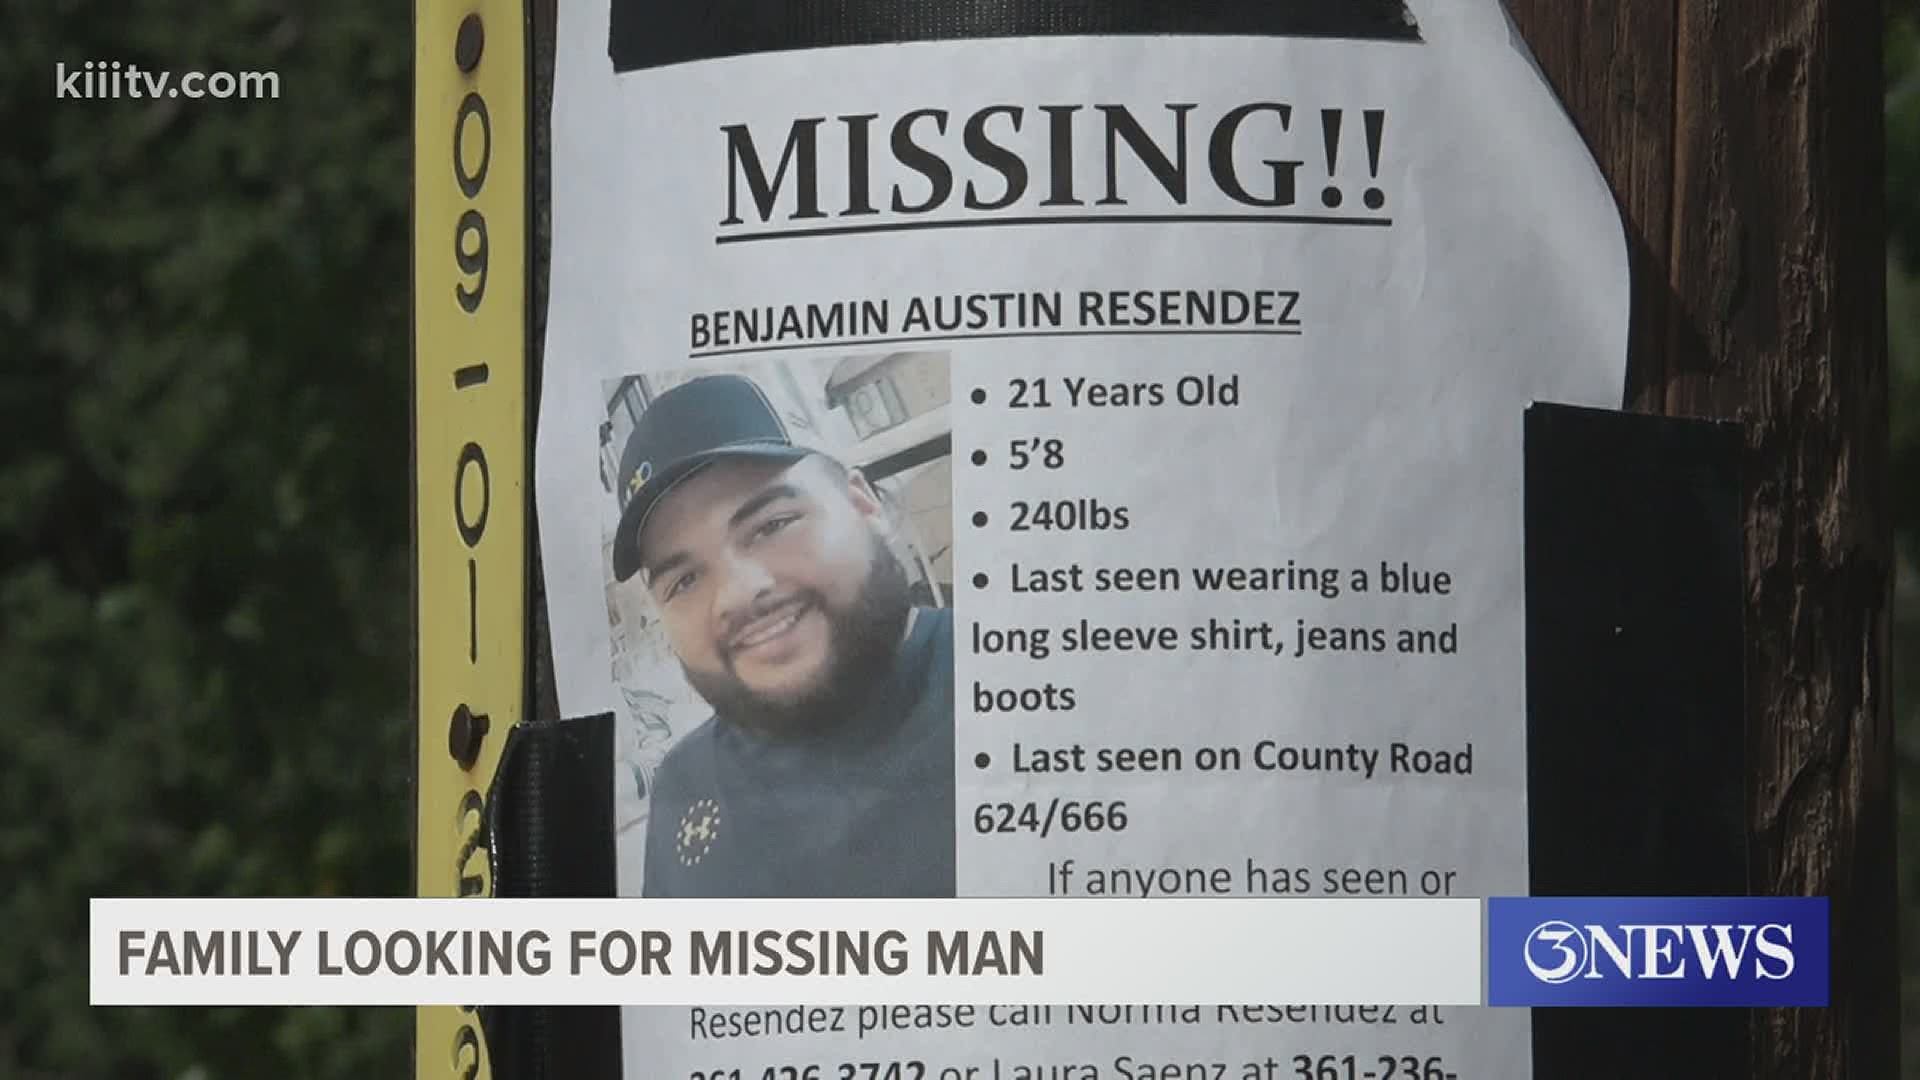 Resendez's family said he was last seen on County Road 624 and 666 near Bluntzer.